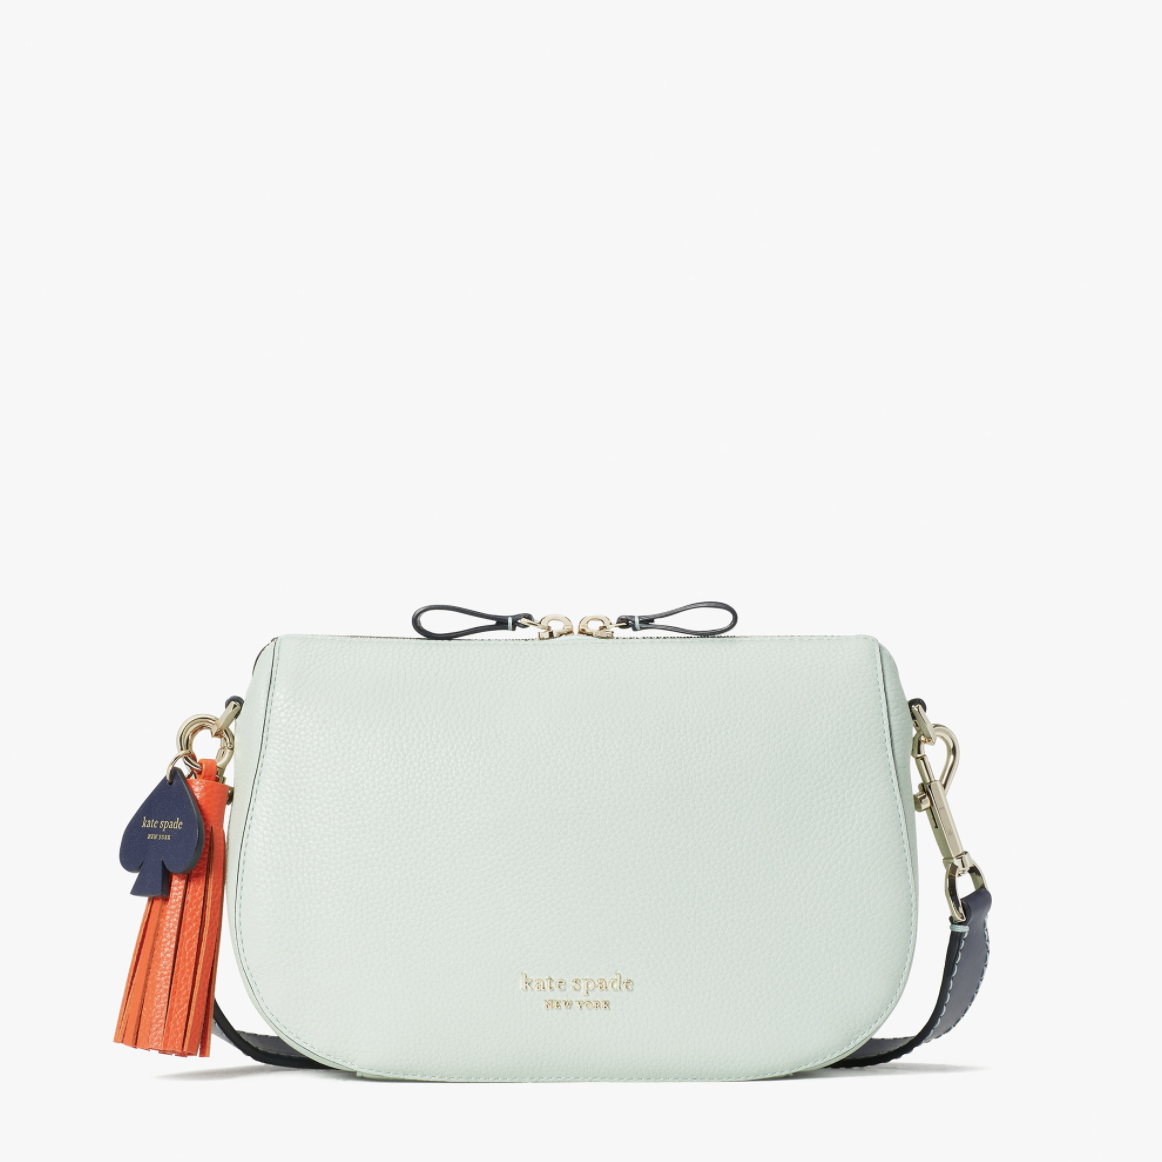 Kate Spade Spring Sale Last Chance to Get 30 Off Spring Styles